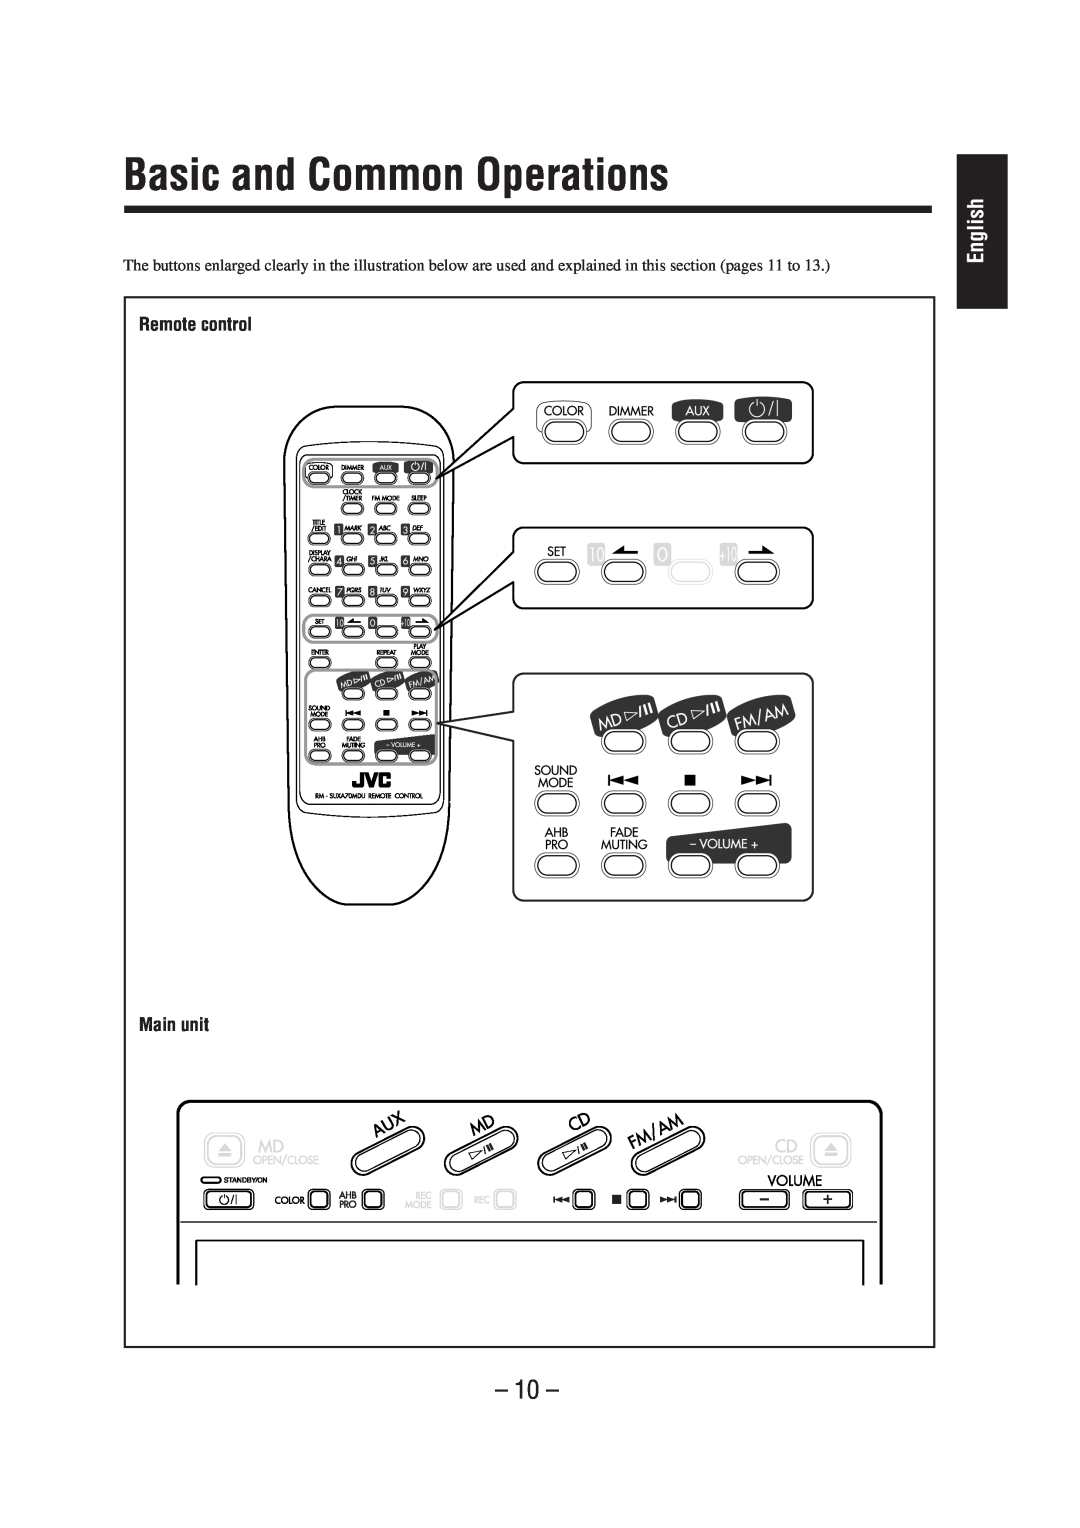 JVC UX-A70MD manual Basic and Common Operations, Remote control, English, Main unit 